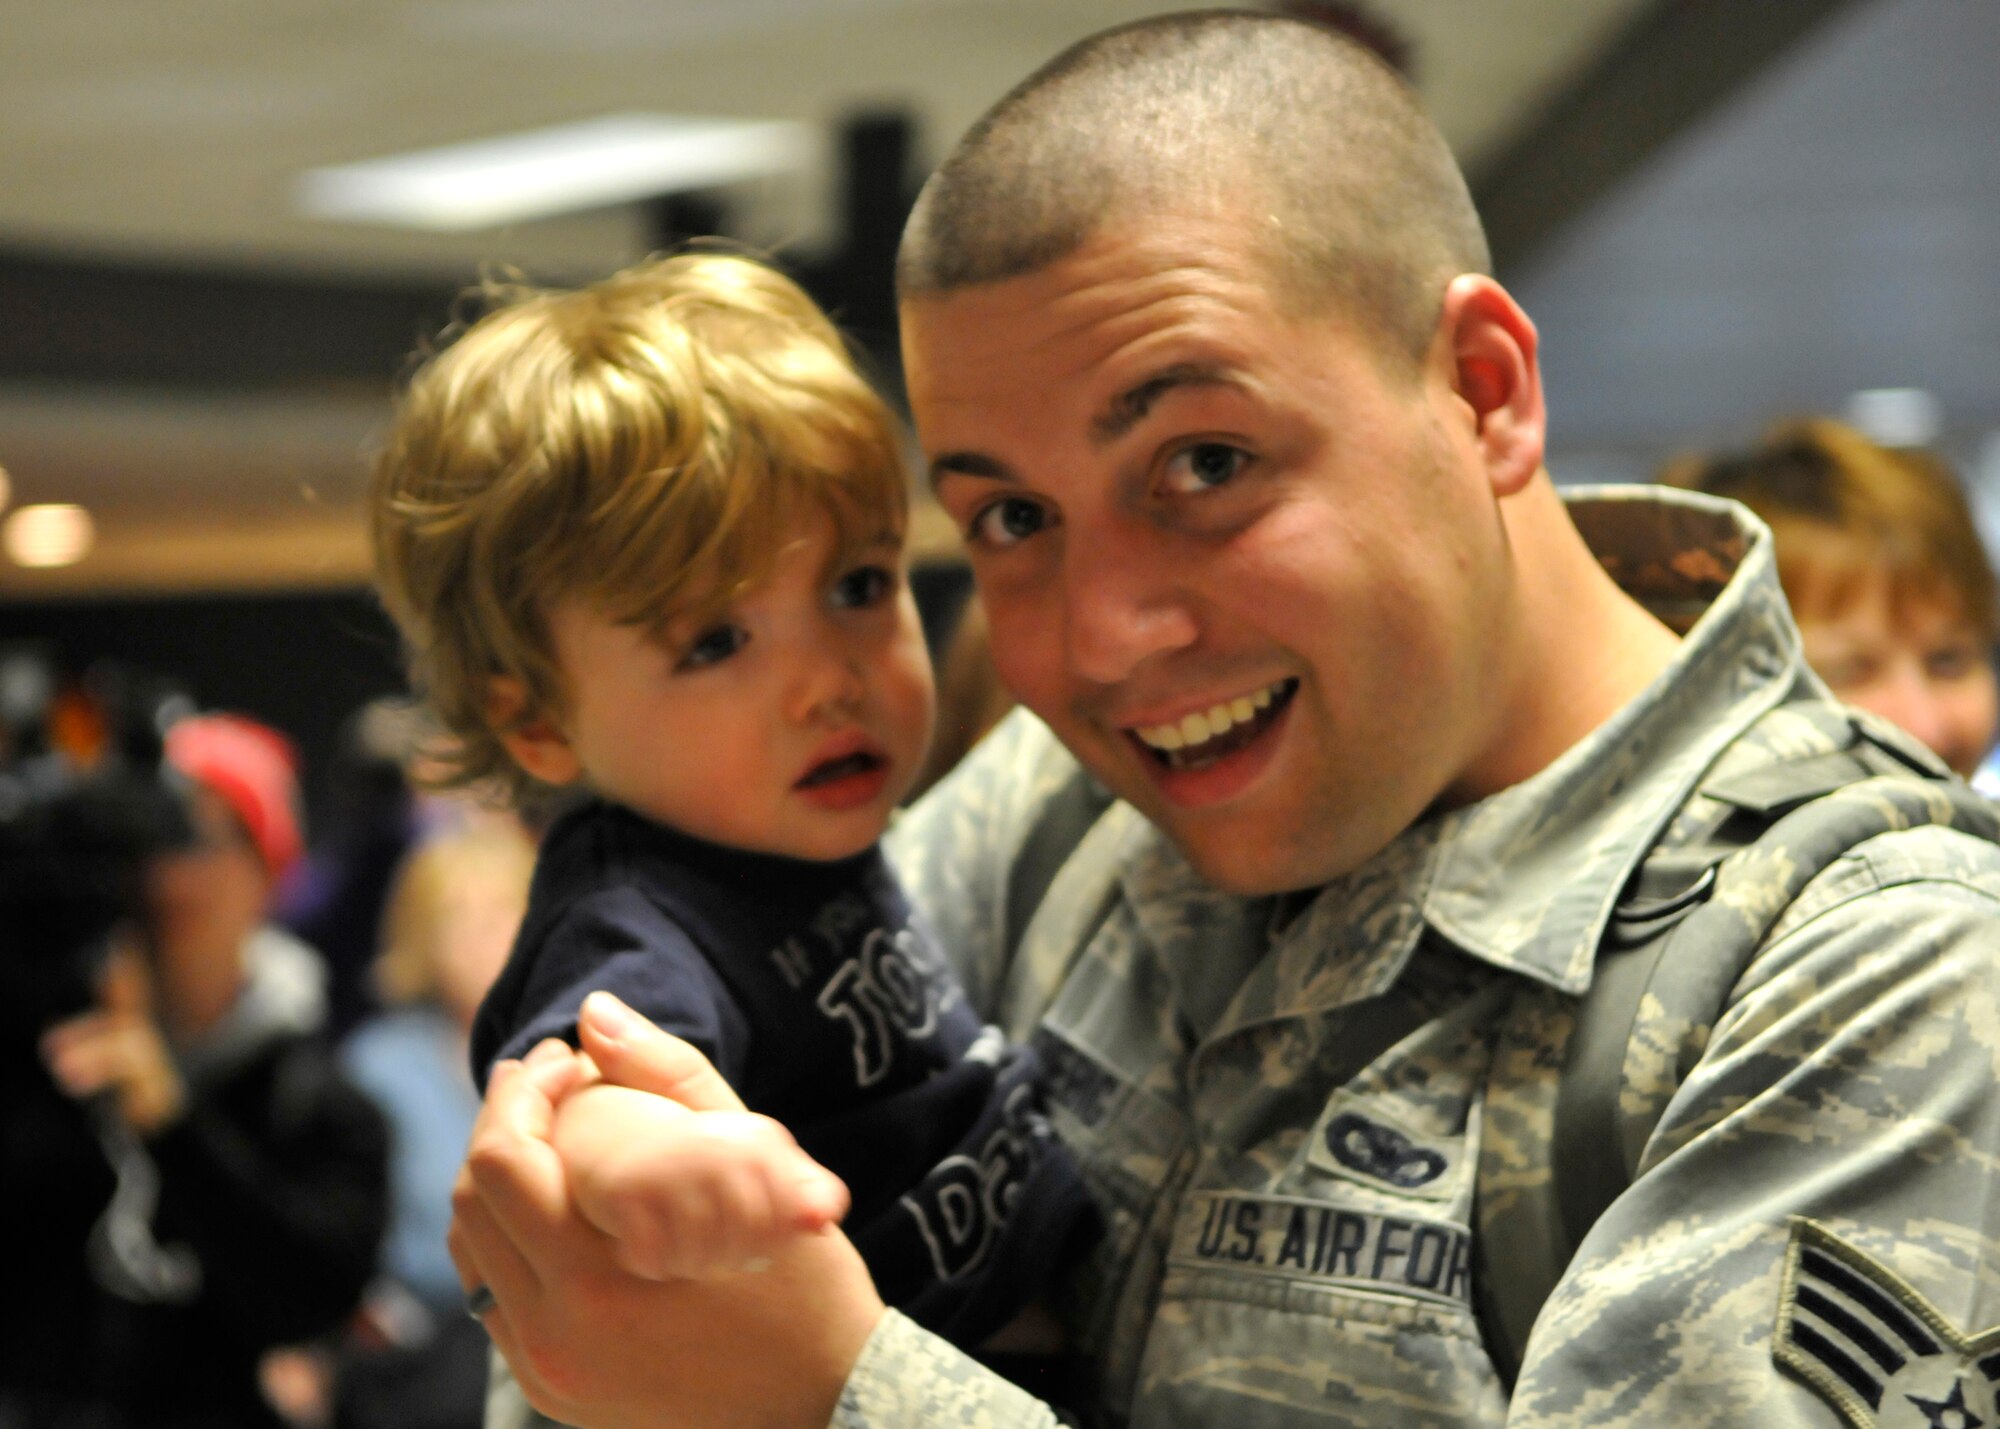 FORT WAYNE AIR NATIONAL GUARD BASE, Ind. – Senior Airman Aaron Strebig, 122nd Fighter Wing, Security Forces, embraces his son as the 122nd Fighter Wing welcomed home more than two-dozen members from the 122nd Security Forces Squadron, as they returned from a six-month deployment in support of Operation Enduring Freedom, January 23, 2015 at the Fort Wayne International Airport.  Twenty-six Blacksnakes mobilized for this deployment and were assigned to the 379th Expeditionary Security Forces Squadron at Al Udeid Air Base, Qatar. The group spent one month in San Antonio conducting combat preparation, then transitioned to Qatar for six months. 